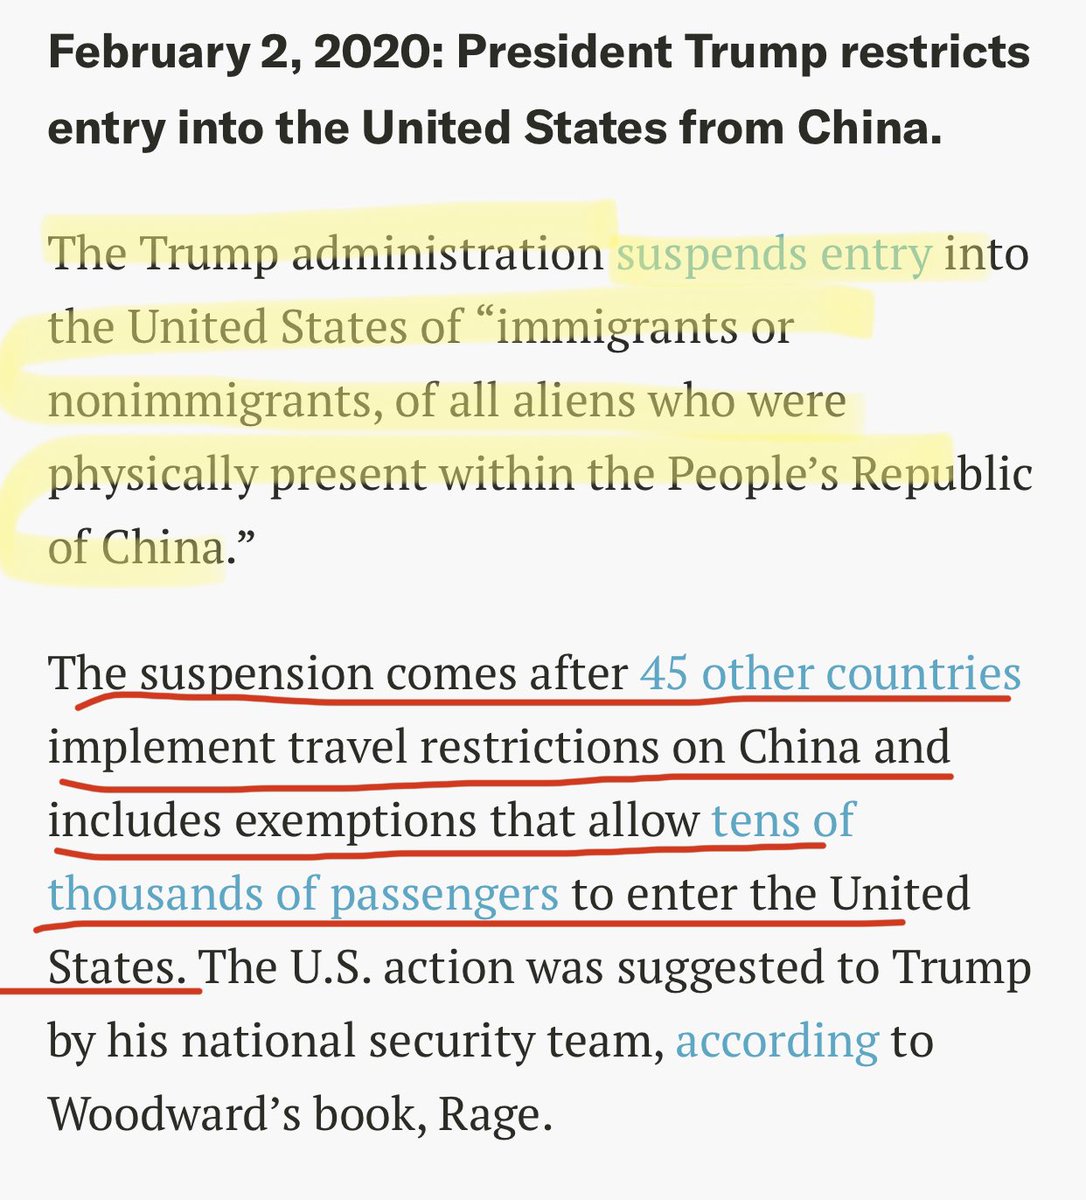 Only AFTER 45 other countries suspend entry from China... Trump listens to his National Security team Feb 2 and suspends entry from China.